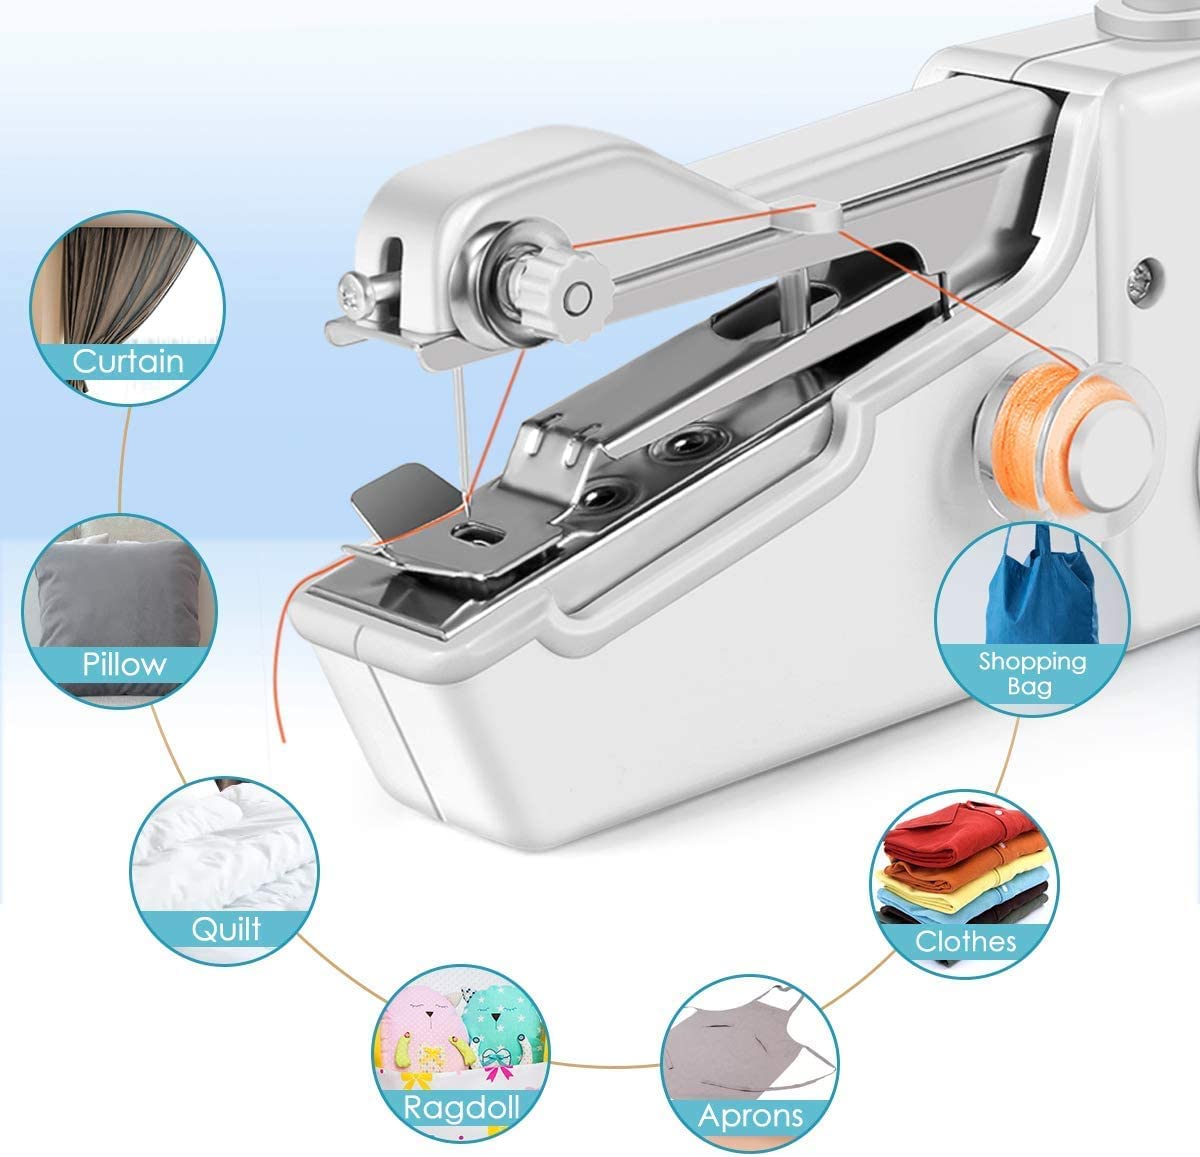 Cordless Portable Electric Sewing Machine